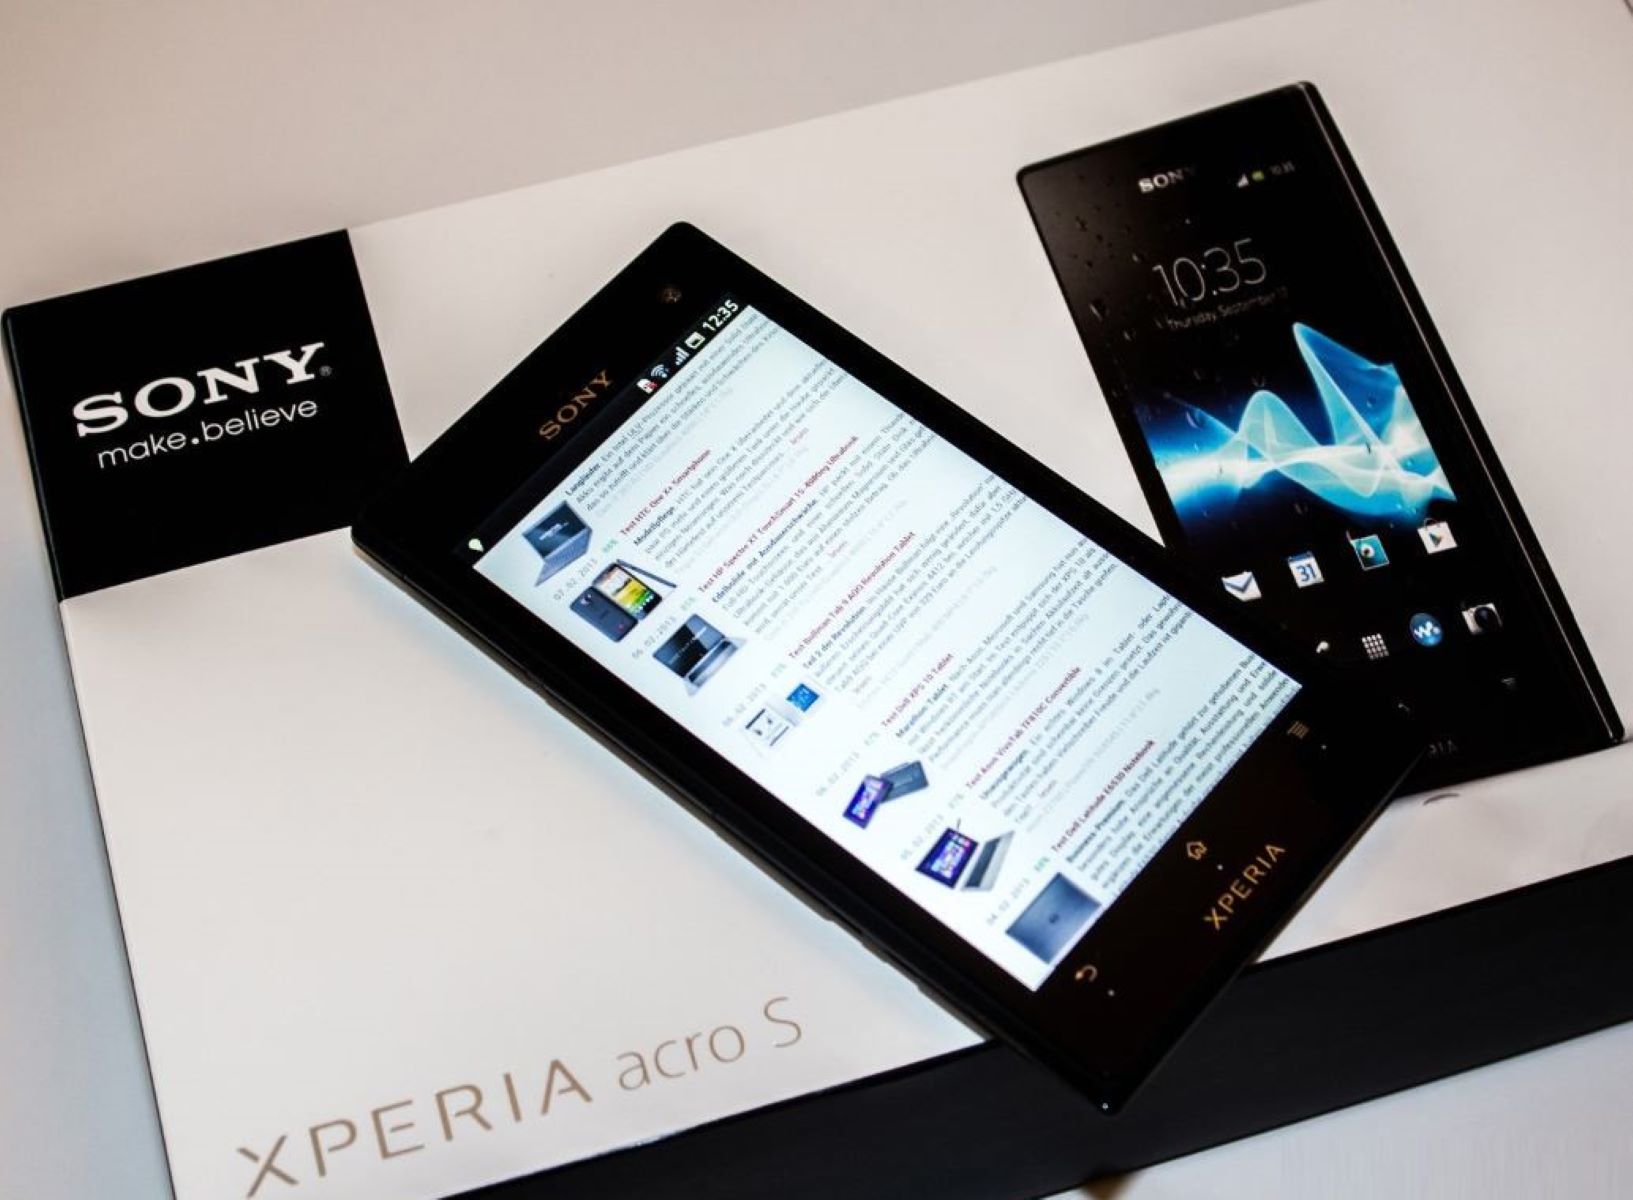 Decoding Xperia Acro S: Checking Serial Number Like A Pro